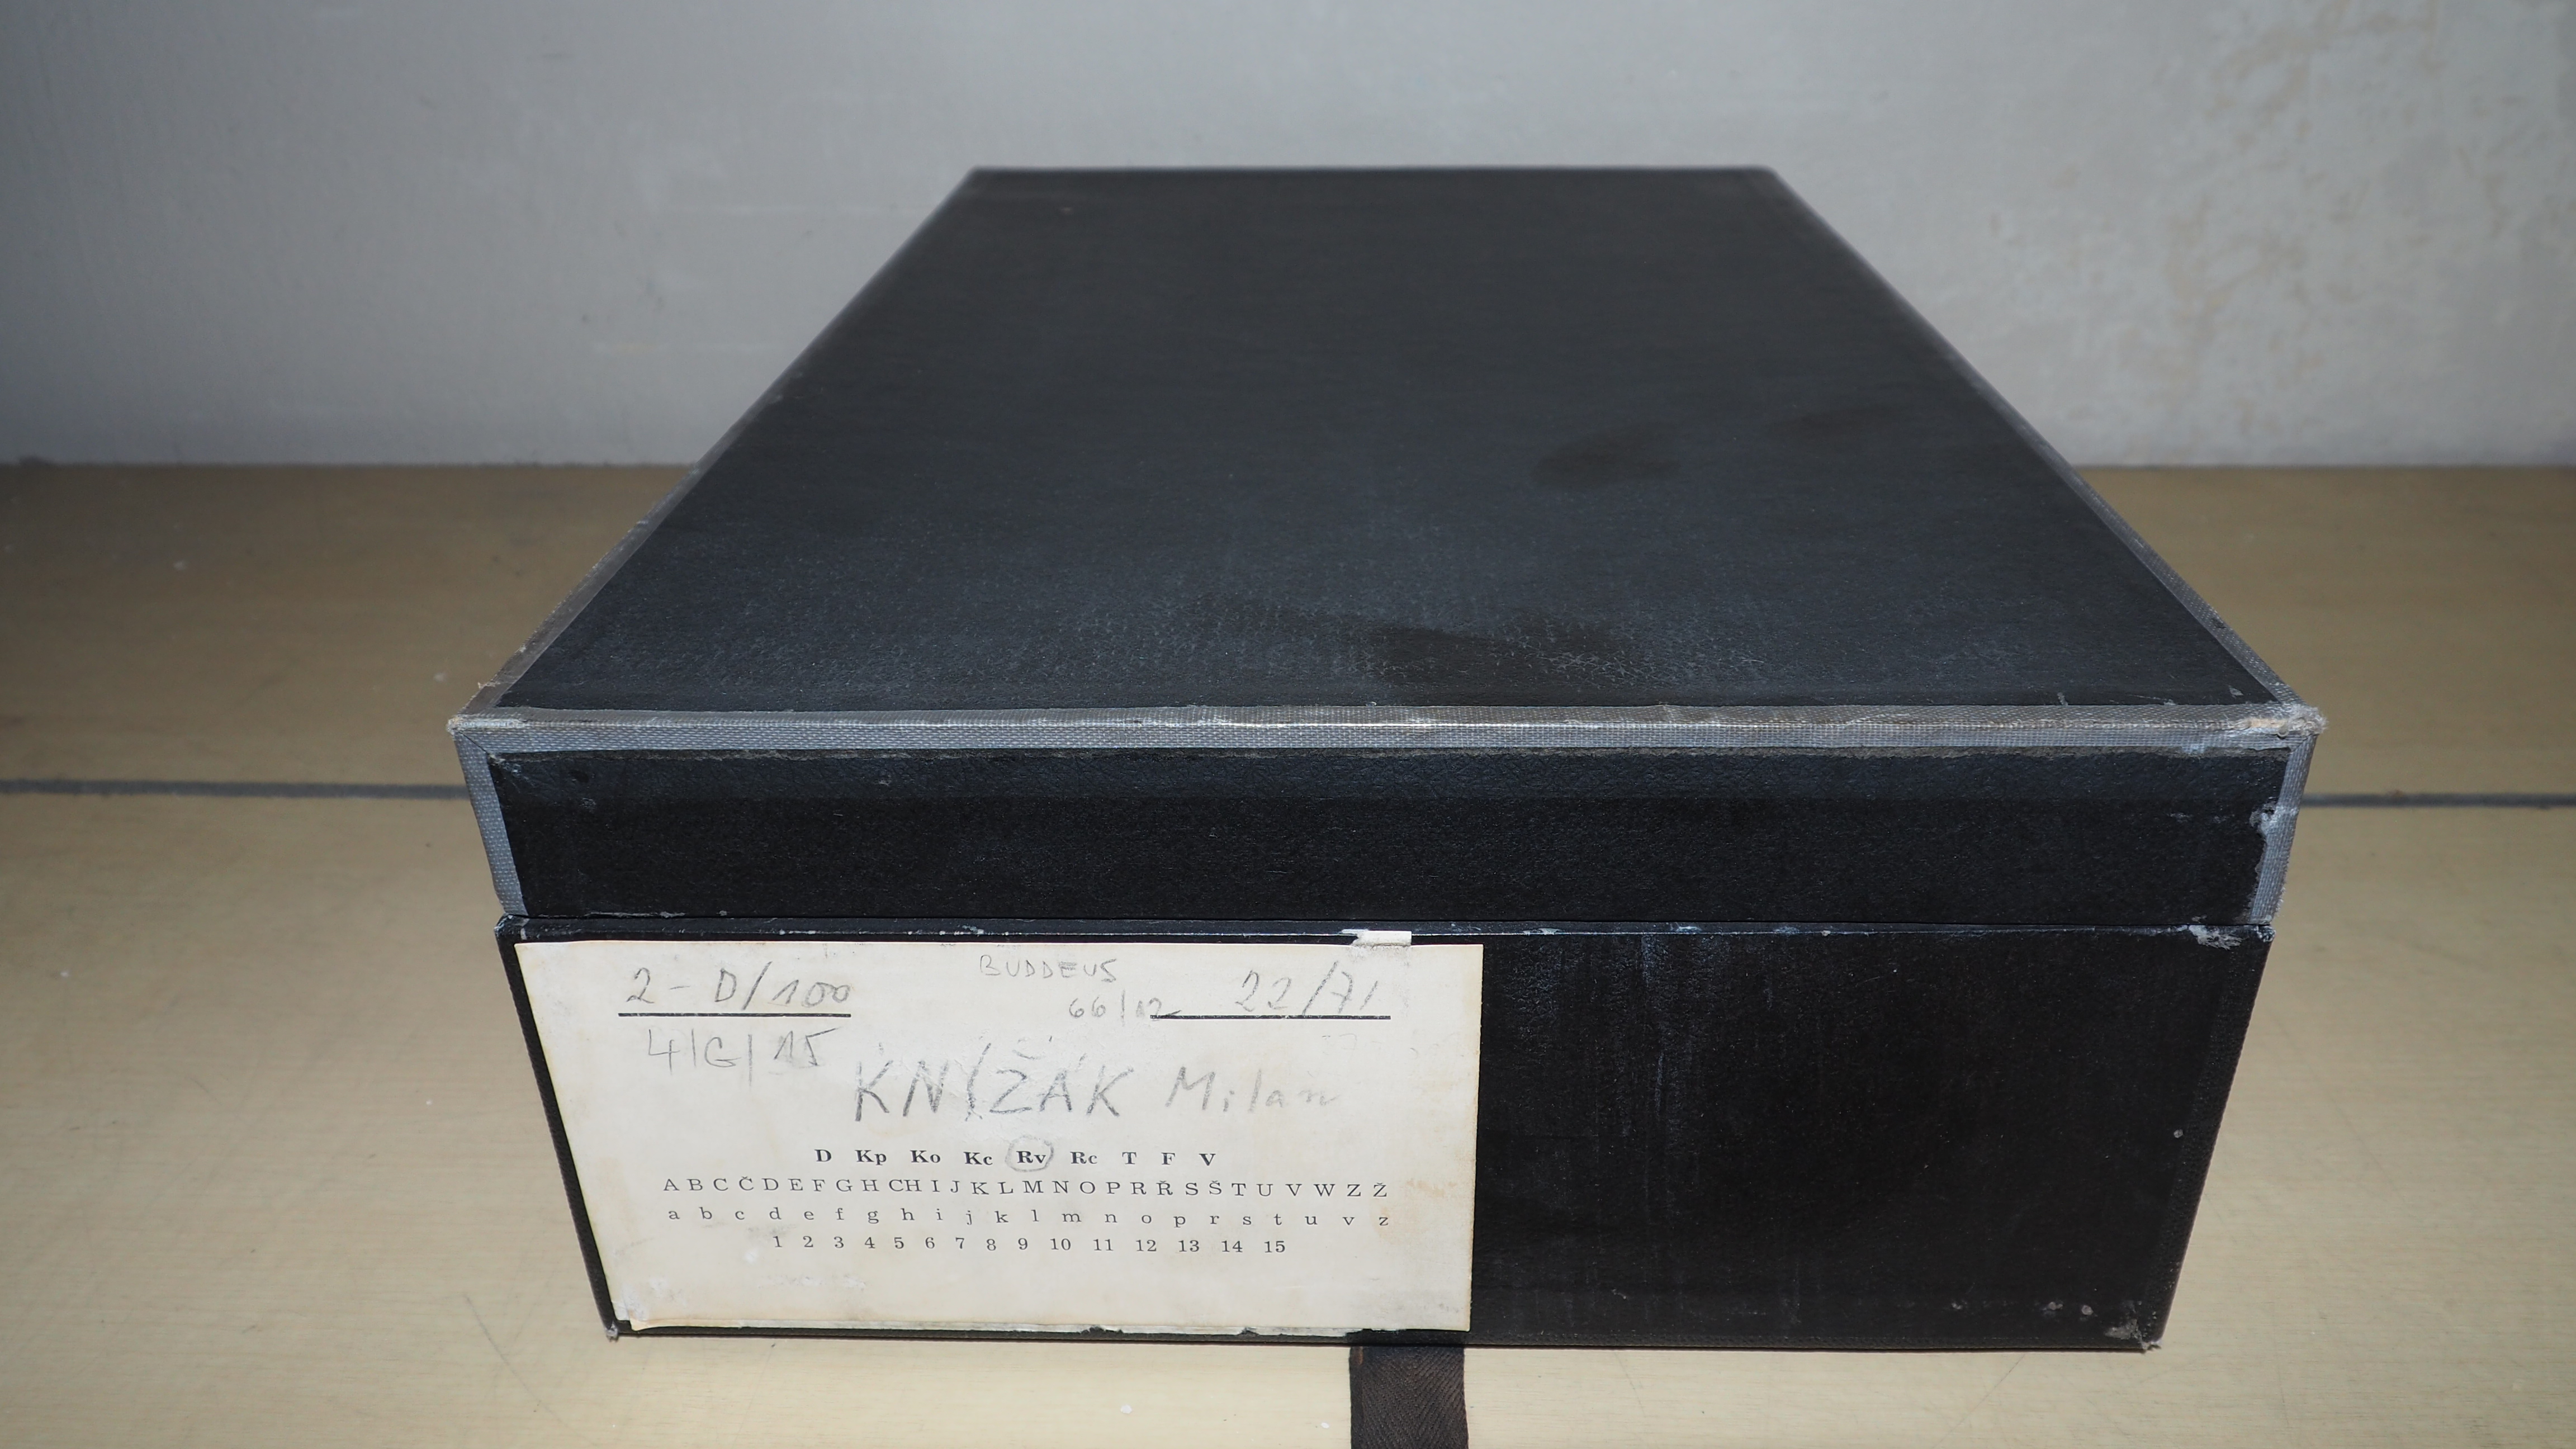 Milan Knížák Collection at the Museum of Czech Literature